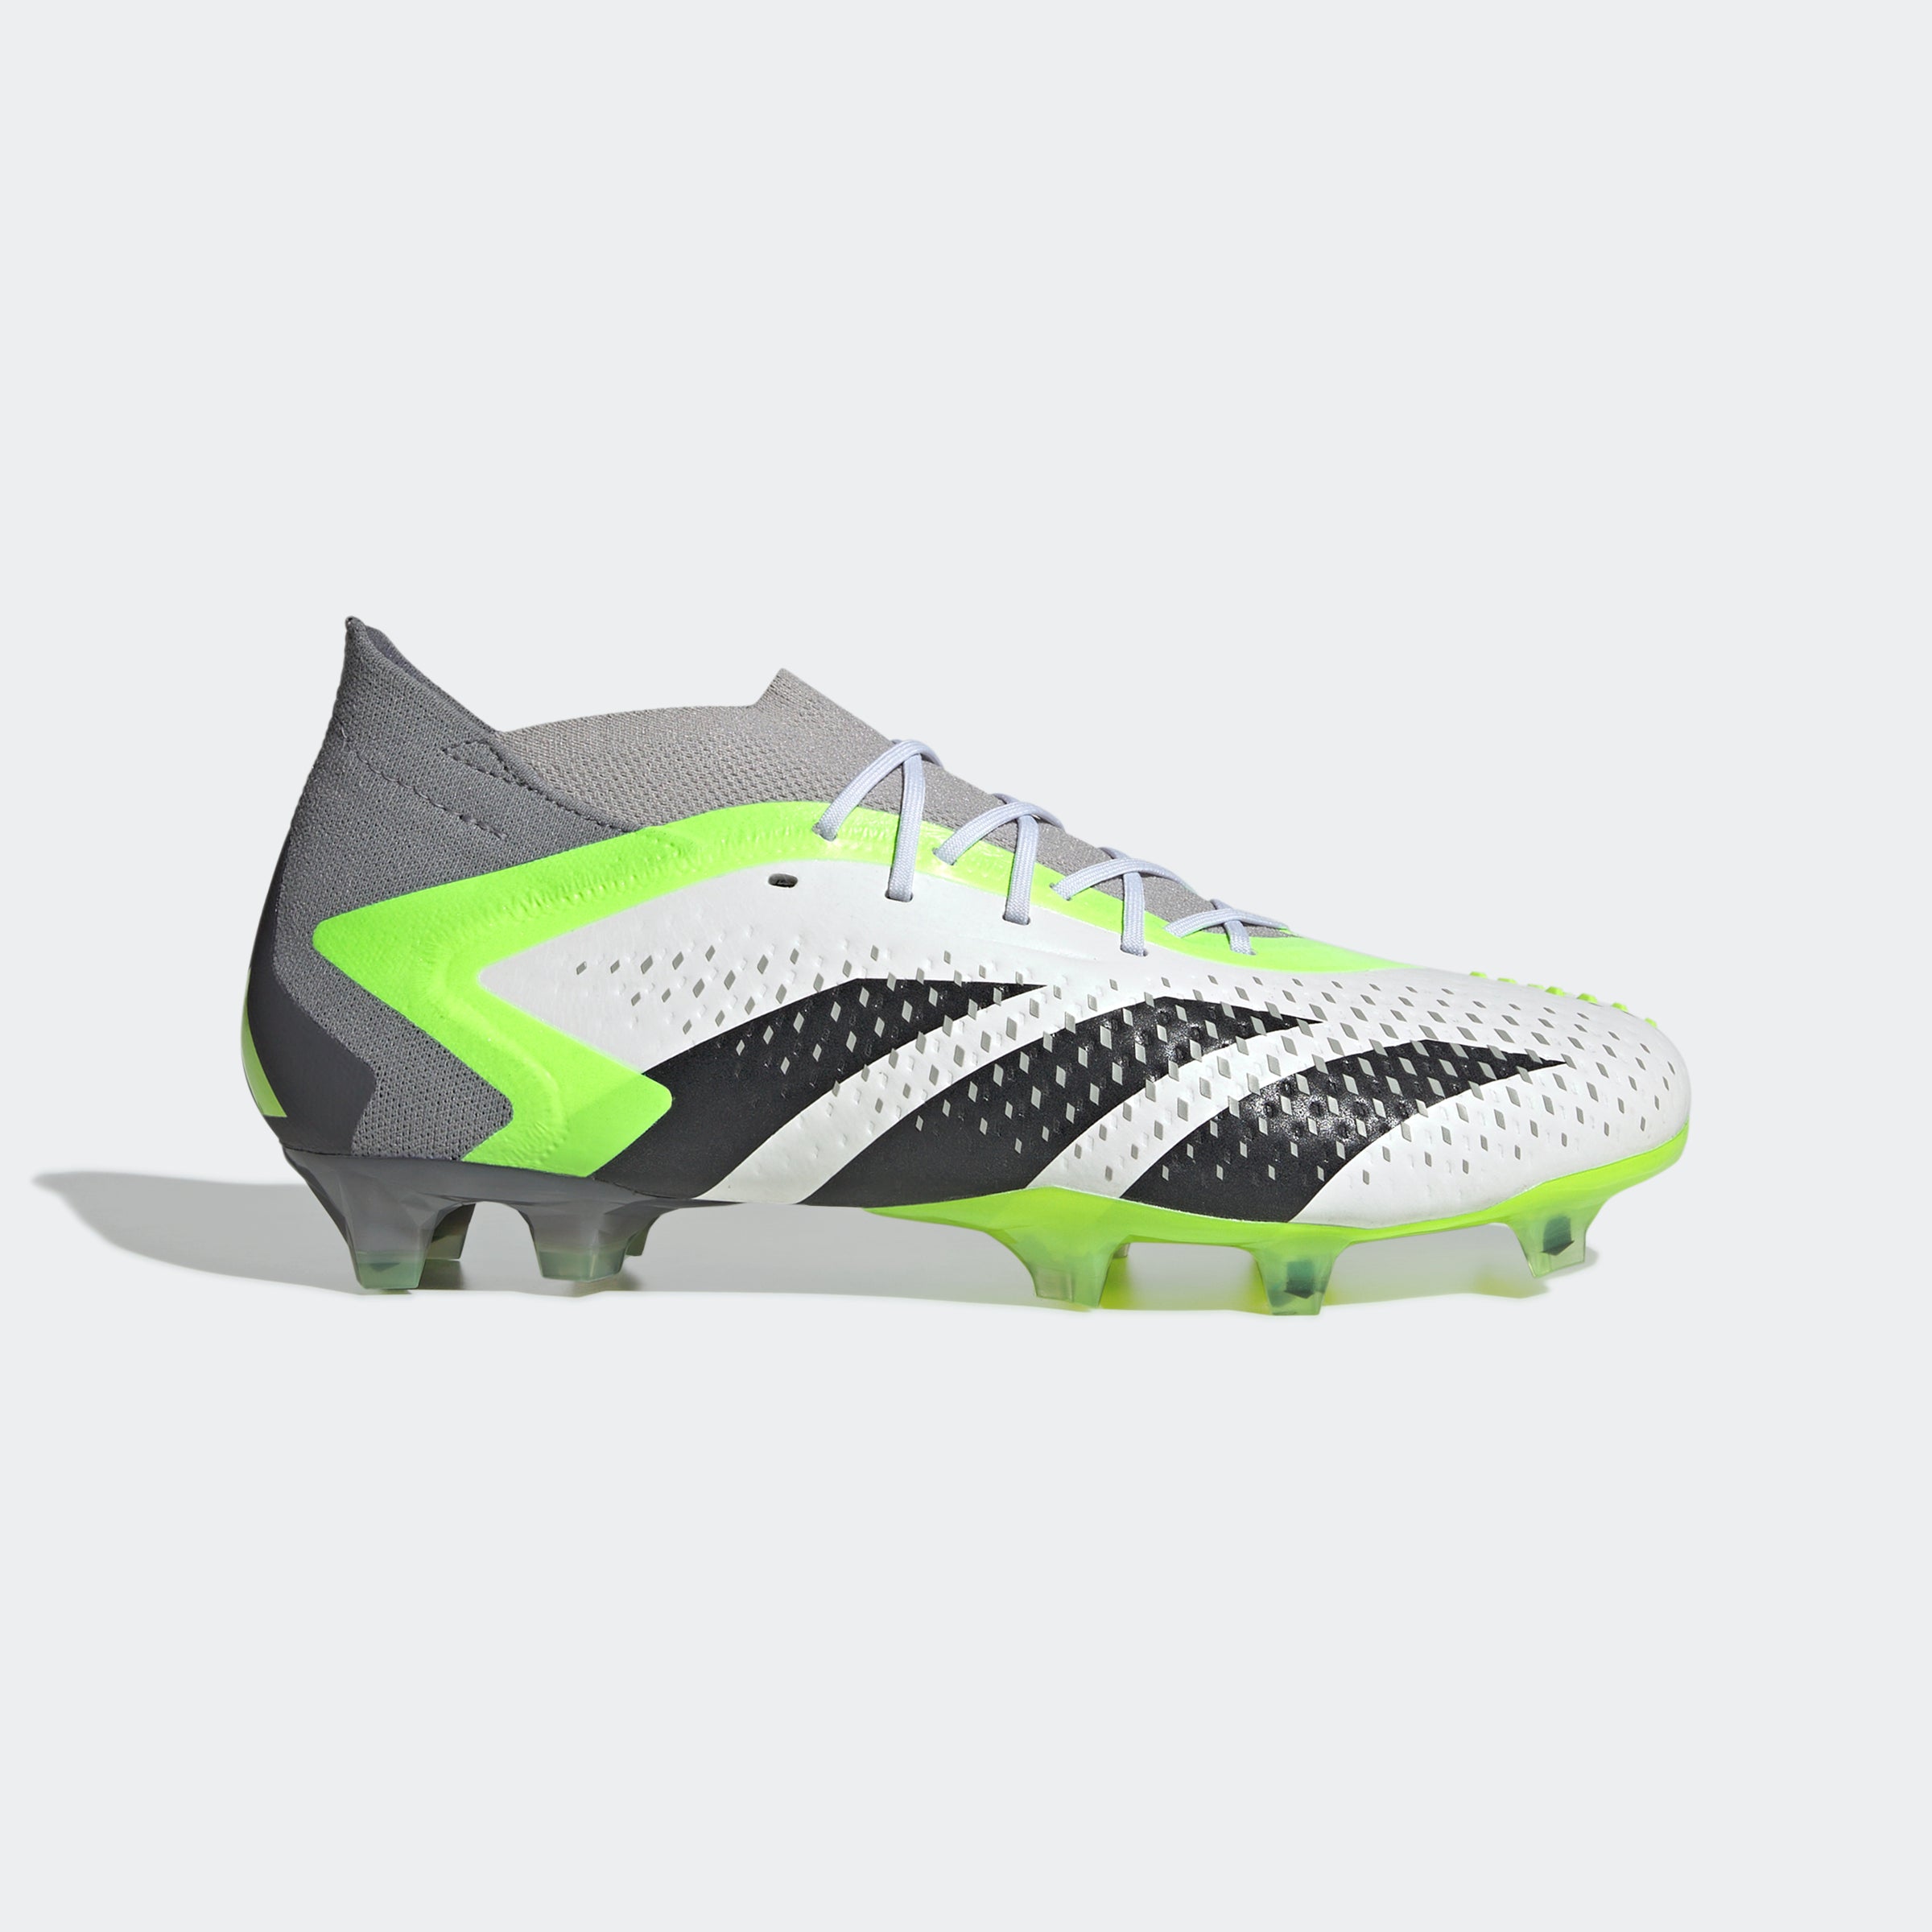 Predator Soccer Cleats, Shoes and Gloves